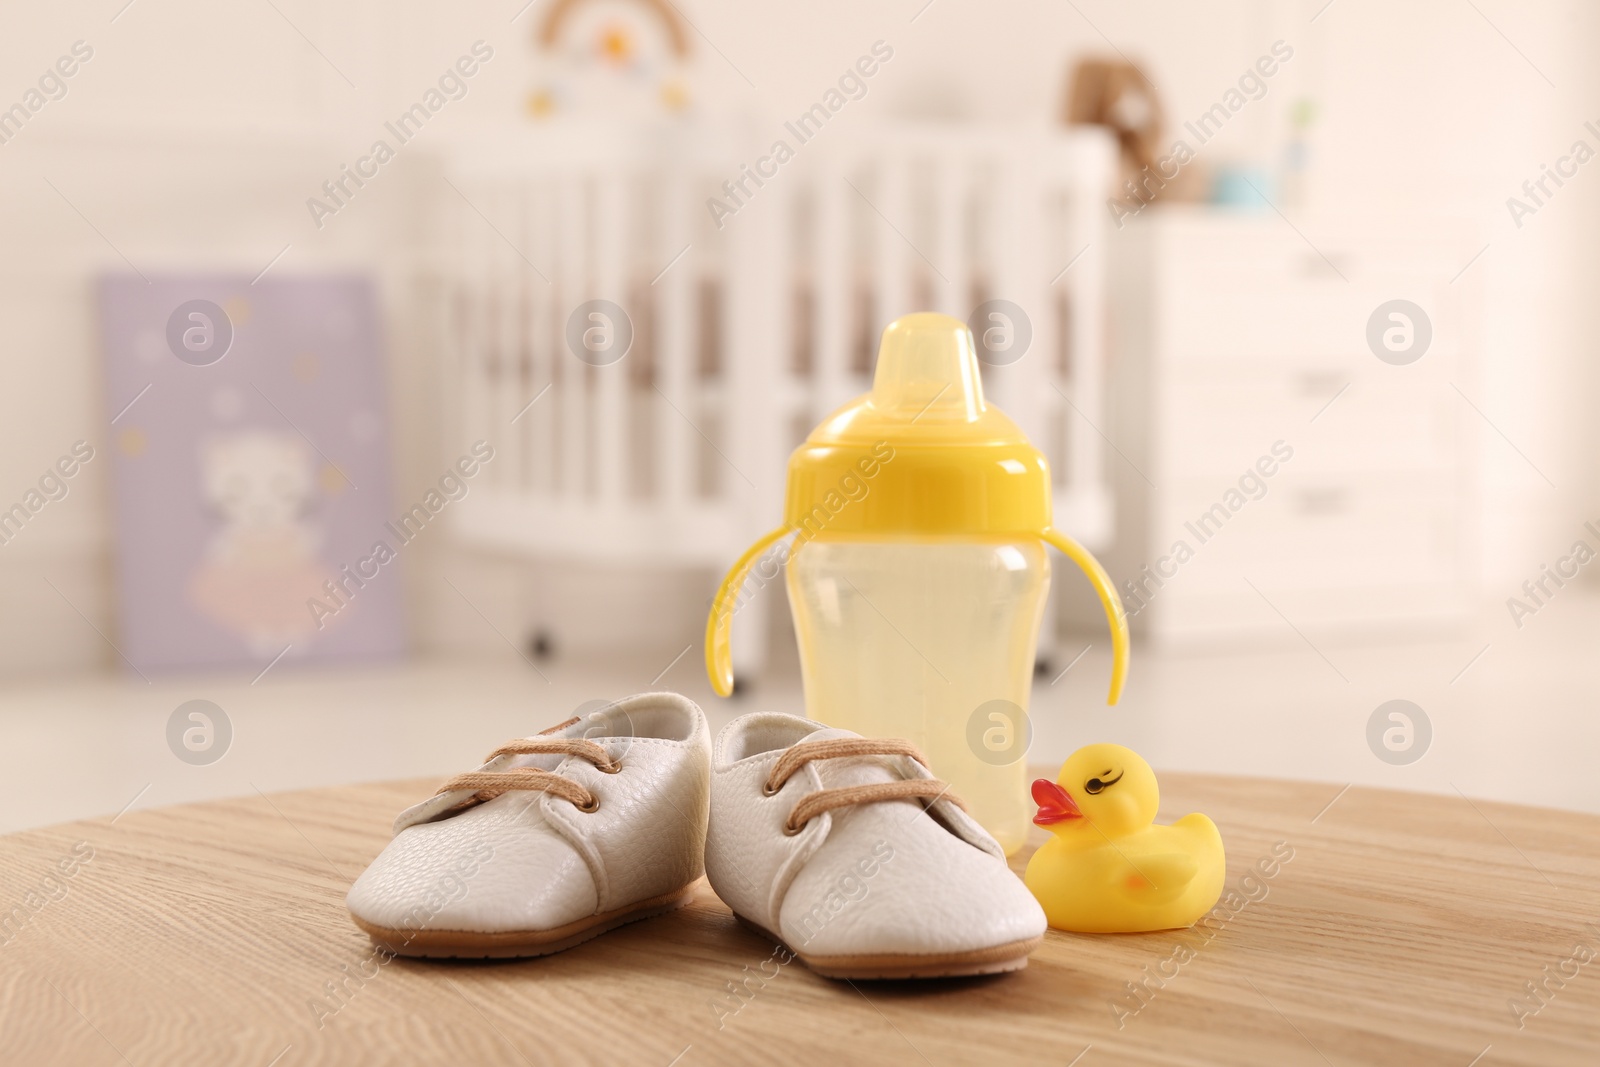 Photo of Baby shoes, bottle and toy duck on wooden table indoors. Maternity leave concept